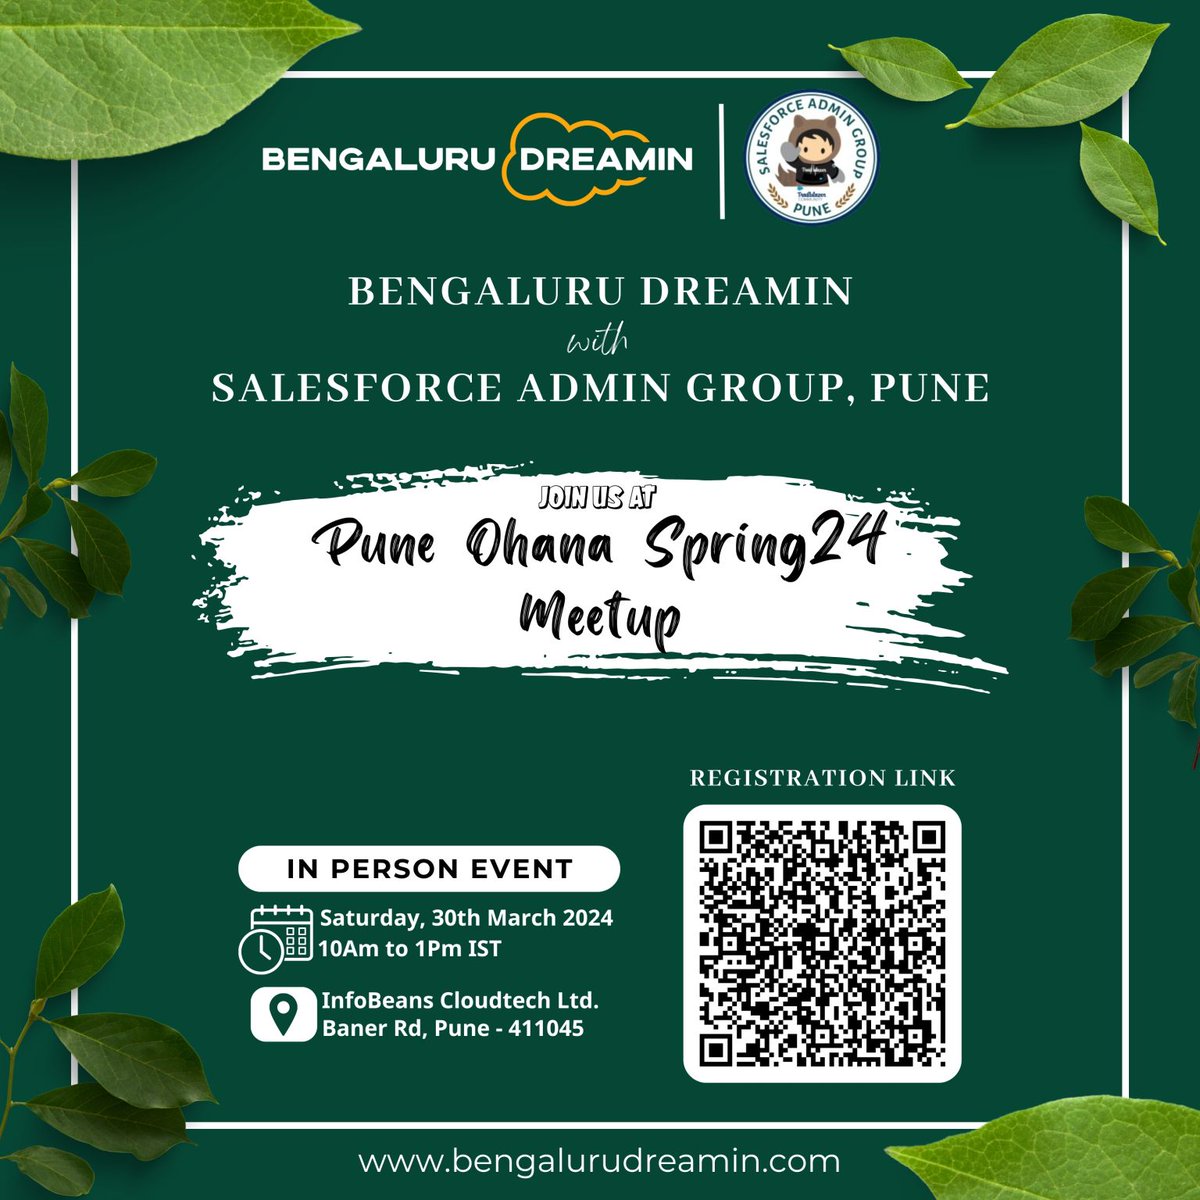 Hello Punekars, As a part of our Roadshow Journey to Bengaluru Dreamin, we're making a stop at the 𝗣𝘂𝗻𝗲 𝗢𝗵𝗮𝗻𝗮 𝗦𝗽𝗿𝗶𝗻𝗴𝟮𝟰 𝗠𝗲𝗲𝘁𝘂𝗽. More details 👇 linkedin.com/posts/bengalur… #BengaluruDreamin24 #Salesforce #blrsfhackathon